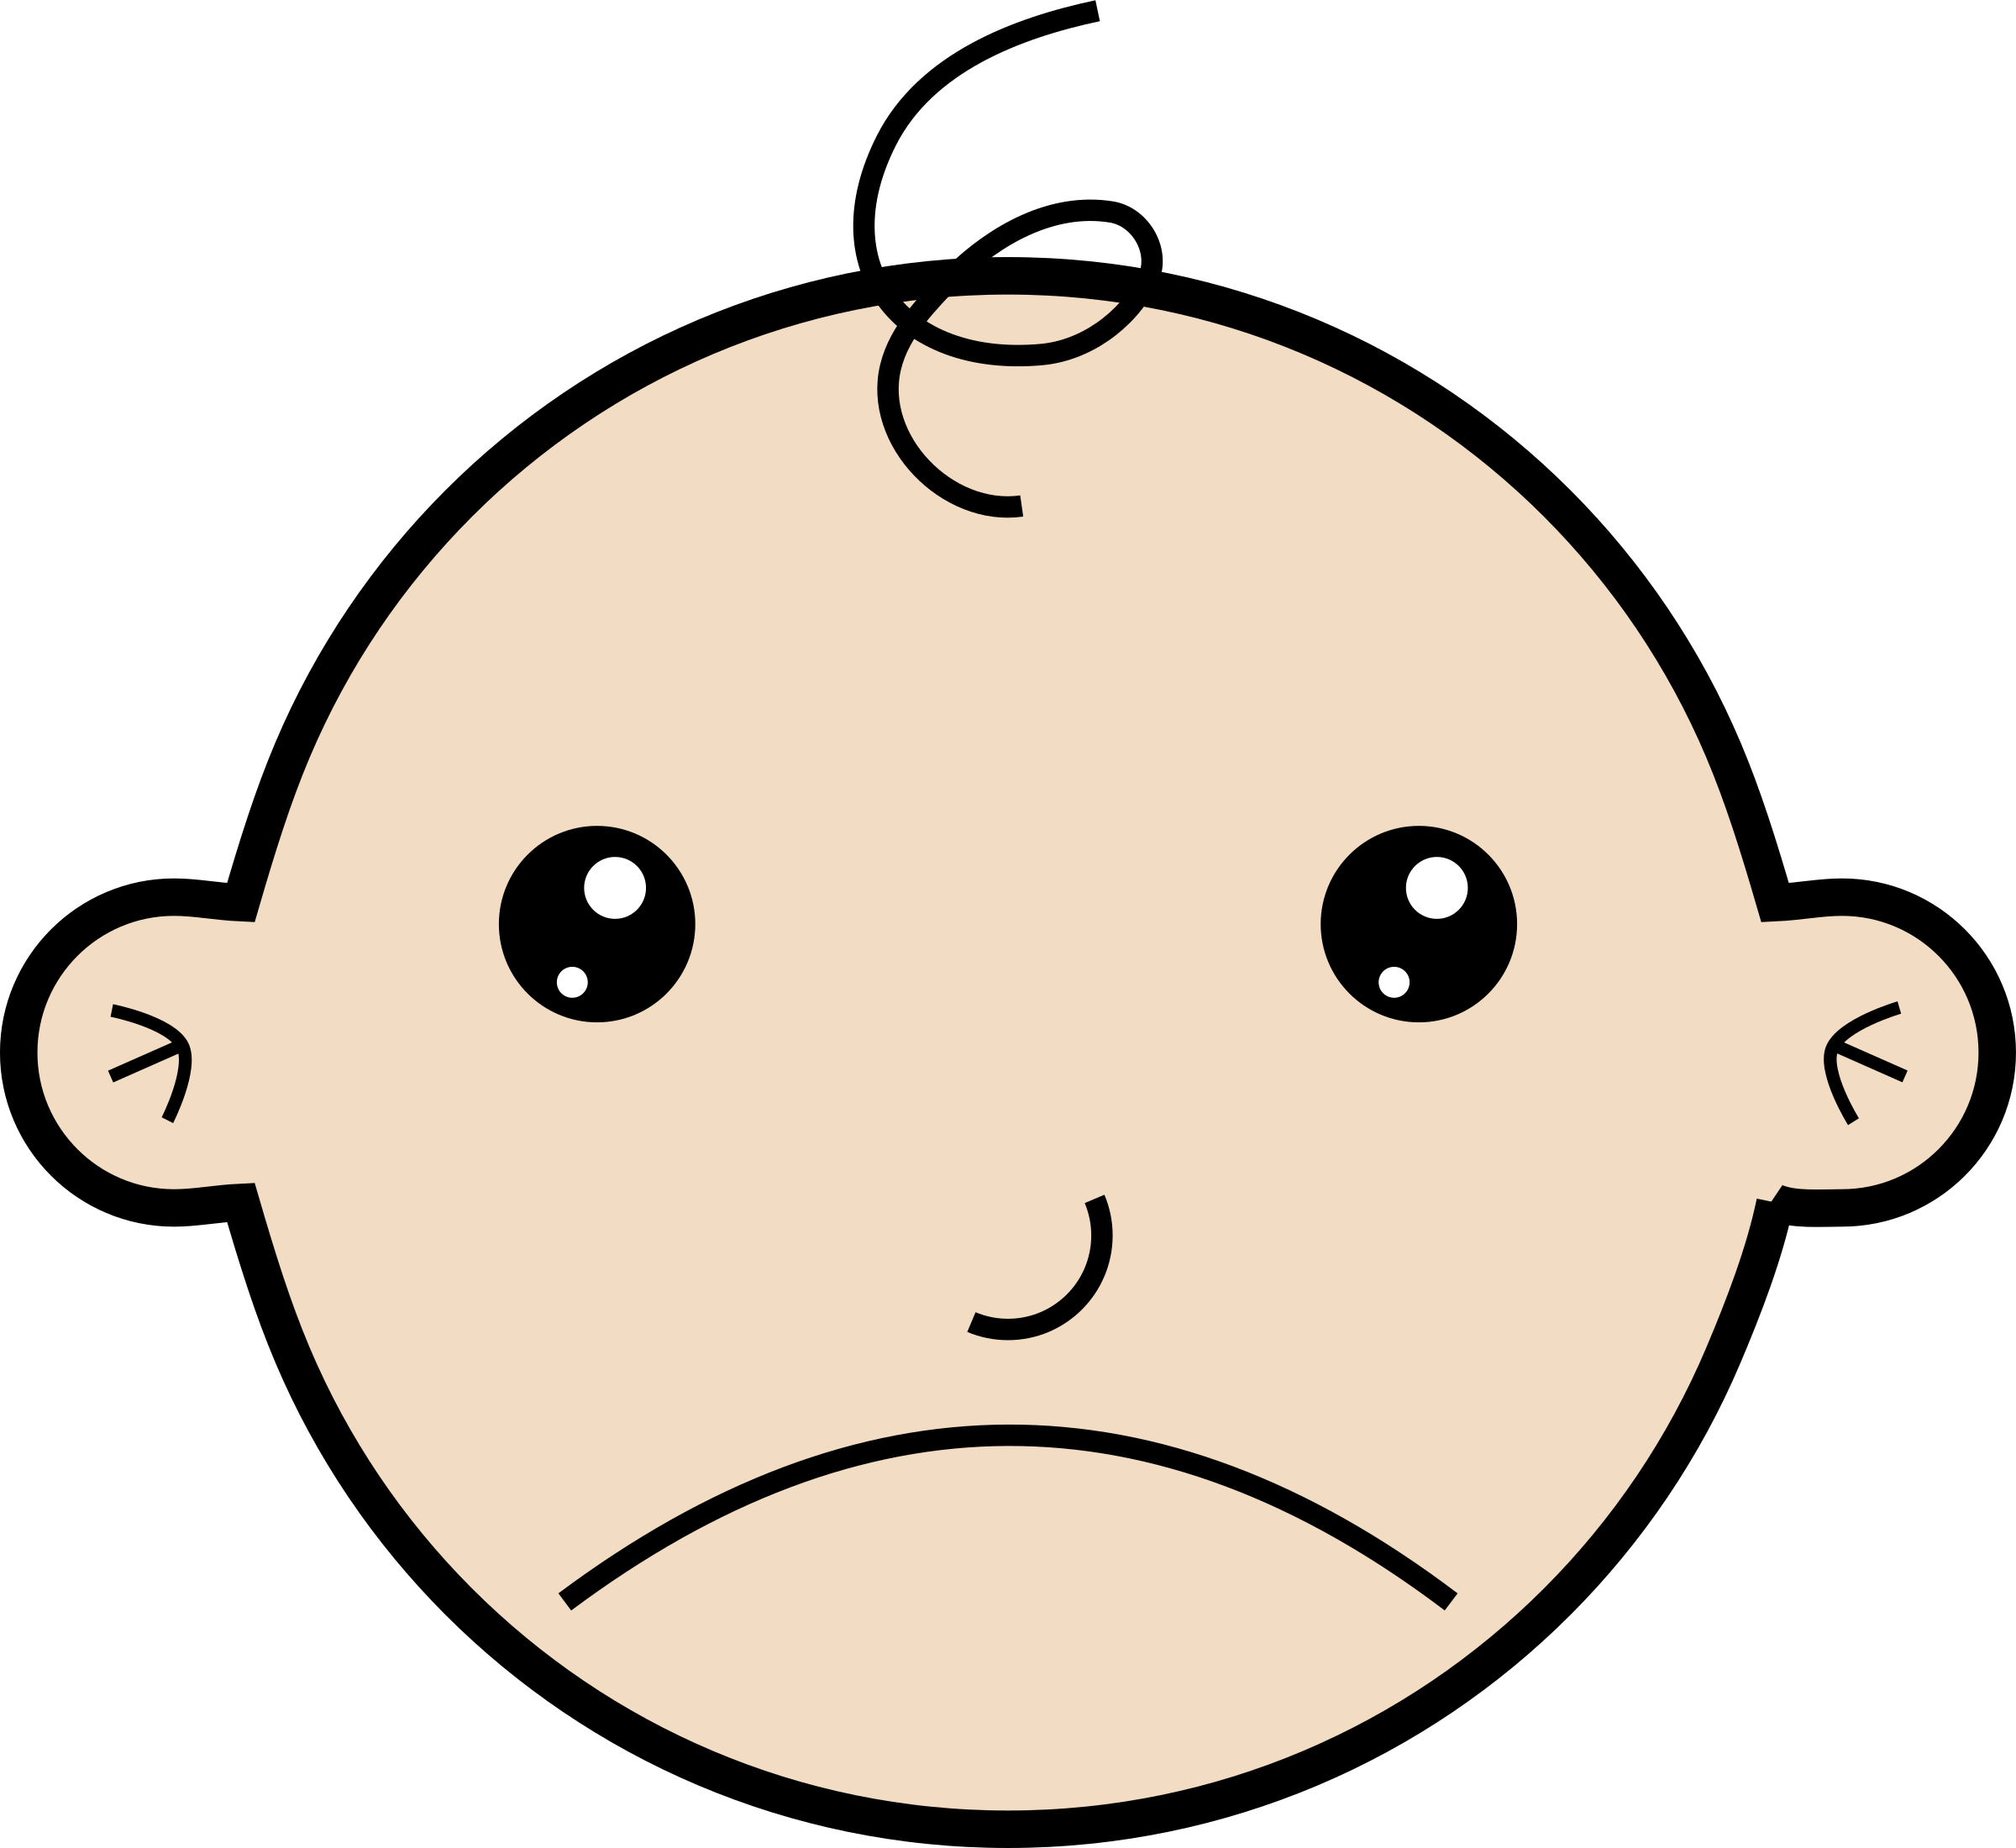 Infant clipart baby face, Infant baby face Transparent FREE.